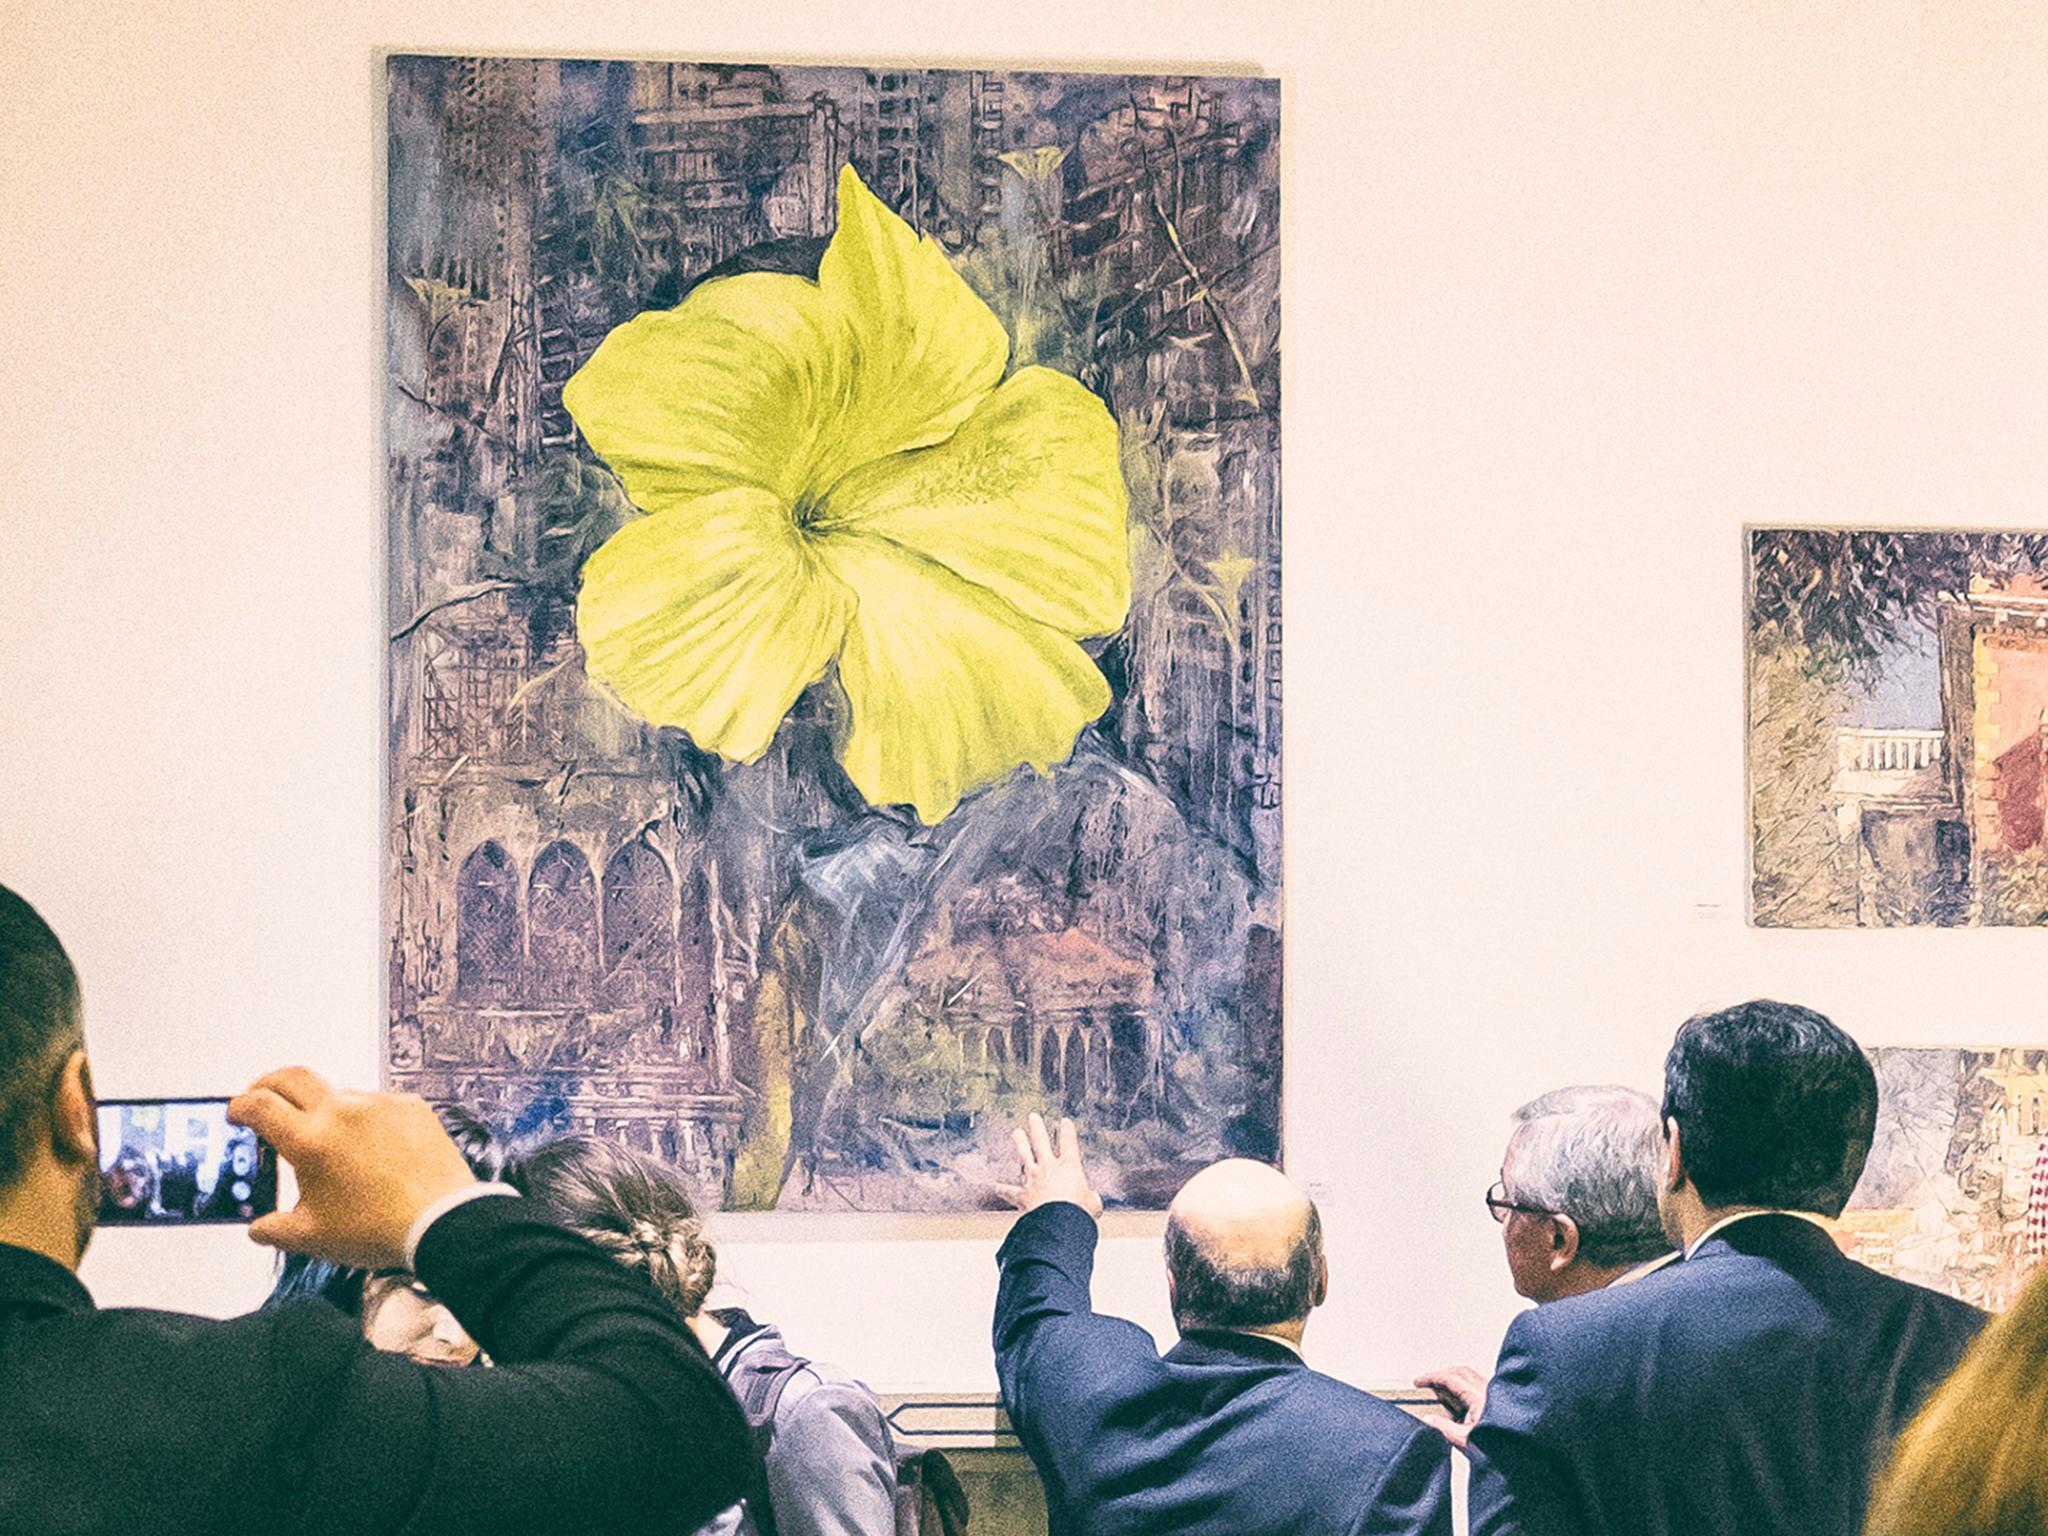 The image of a flower was painted over General Spears’ portrait by artist Tom Young, so that it could be included in the exhibition